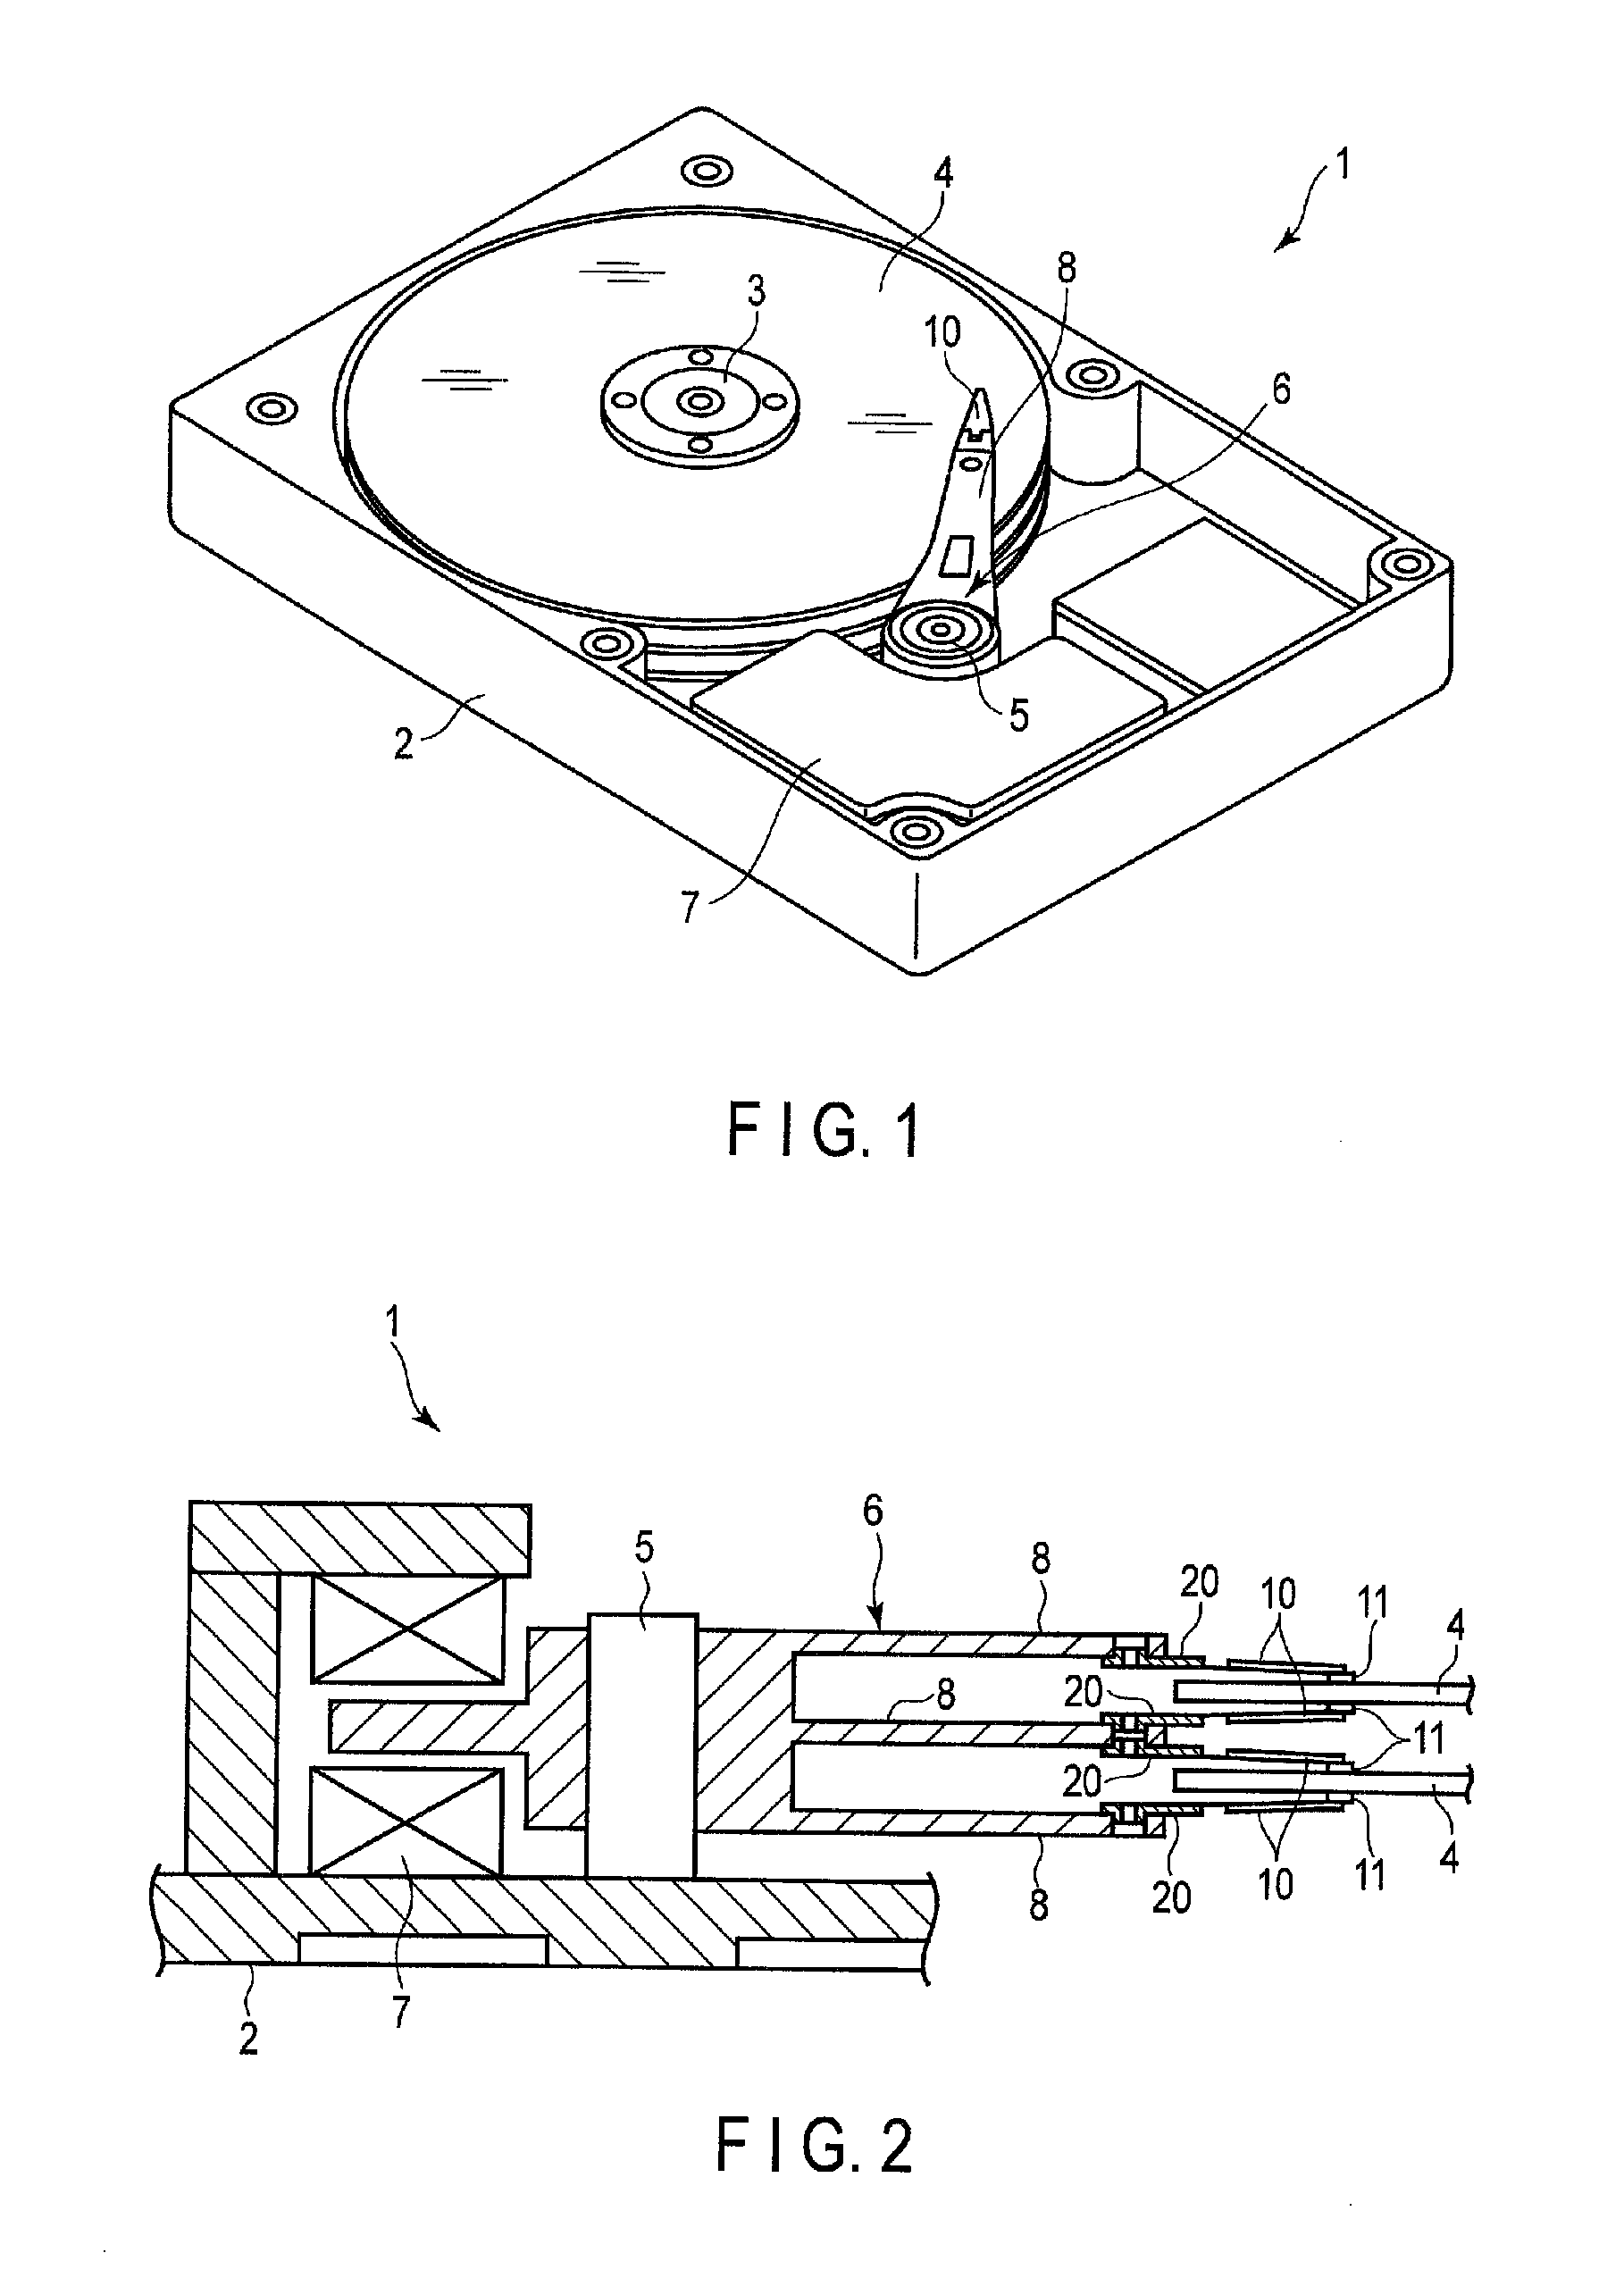 Interleaved circuit of flexure for disk drive